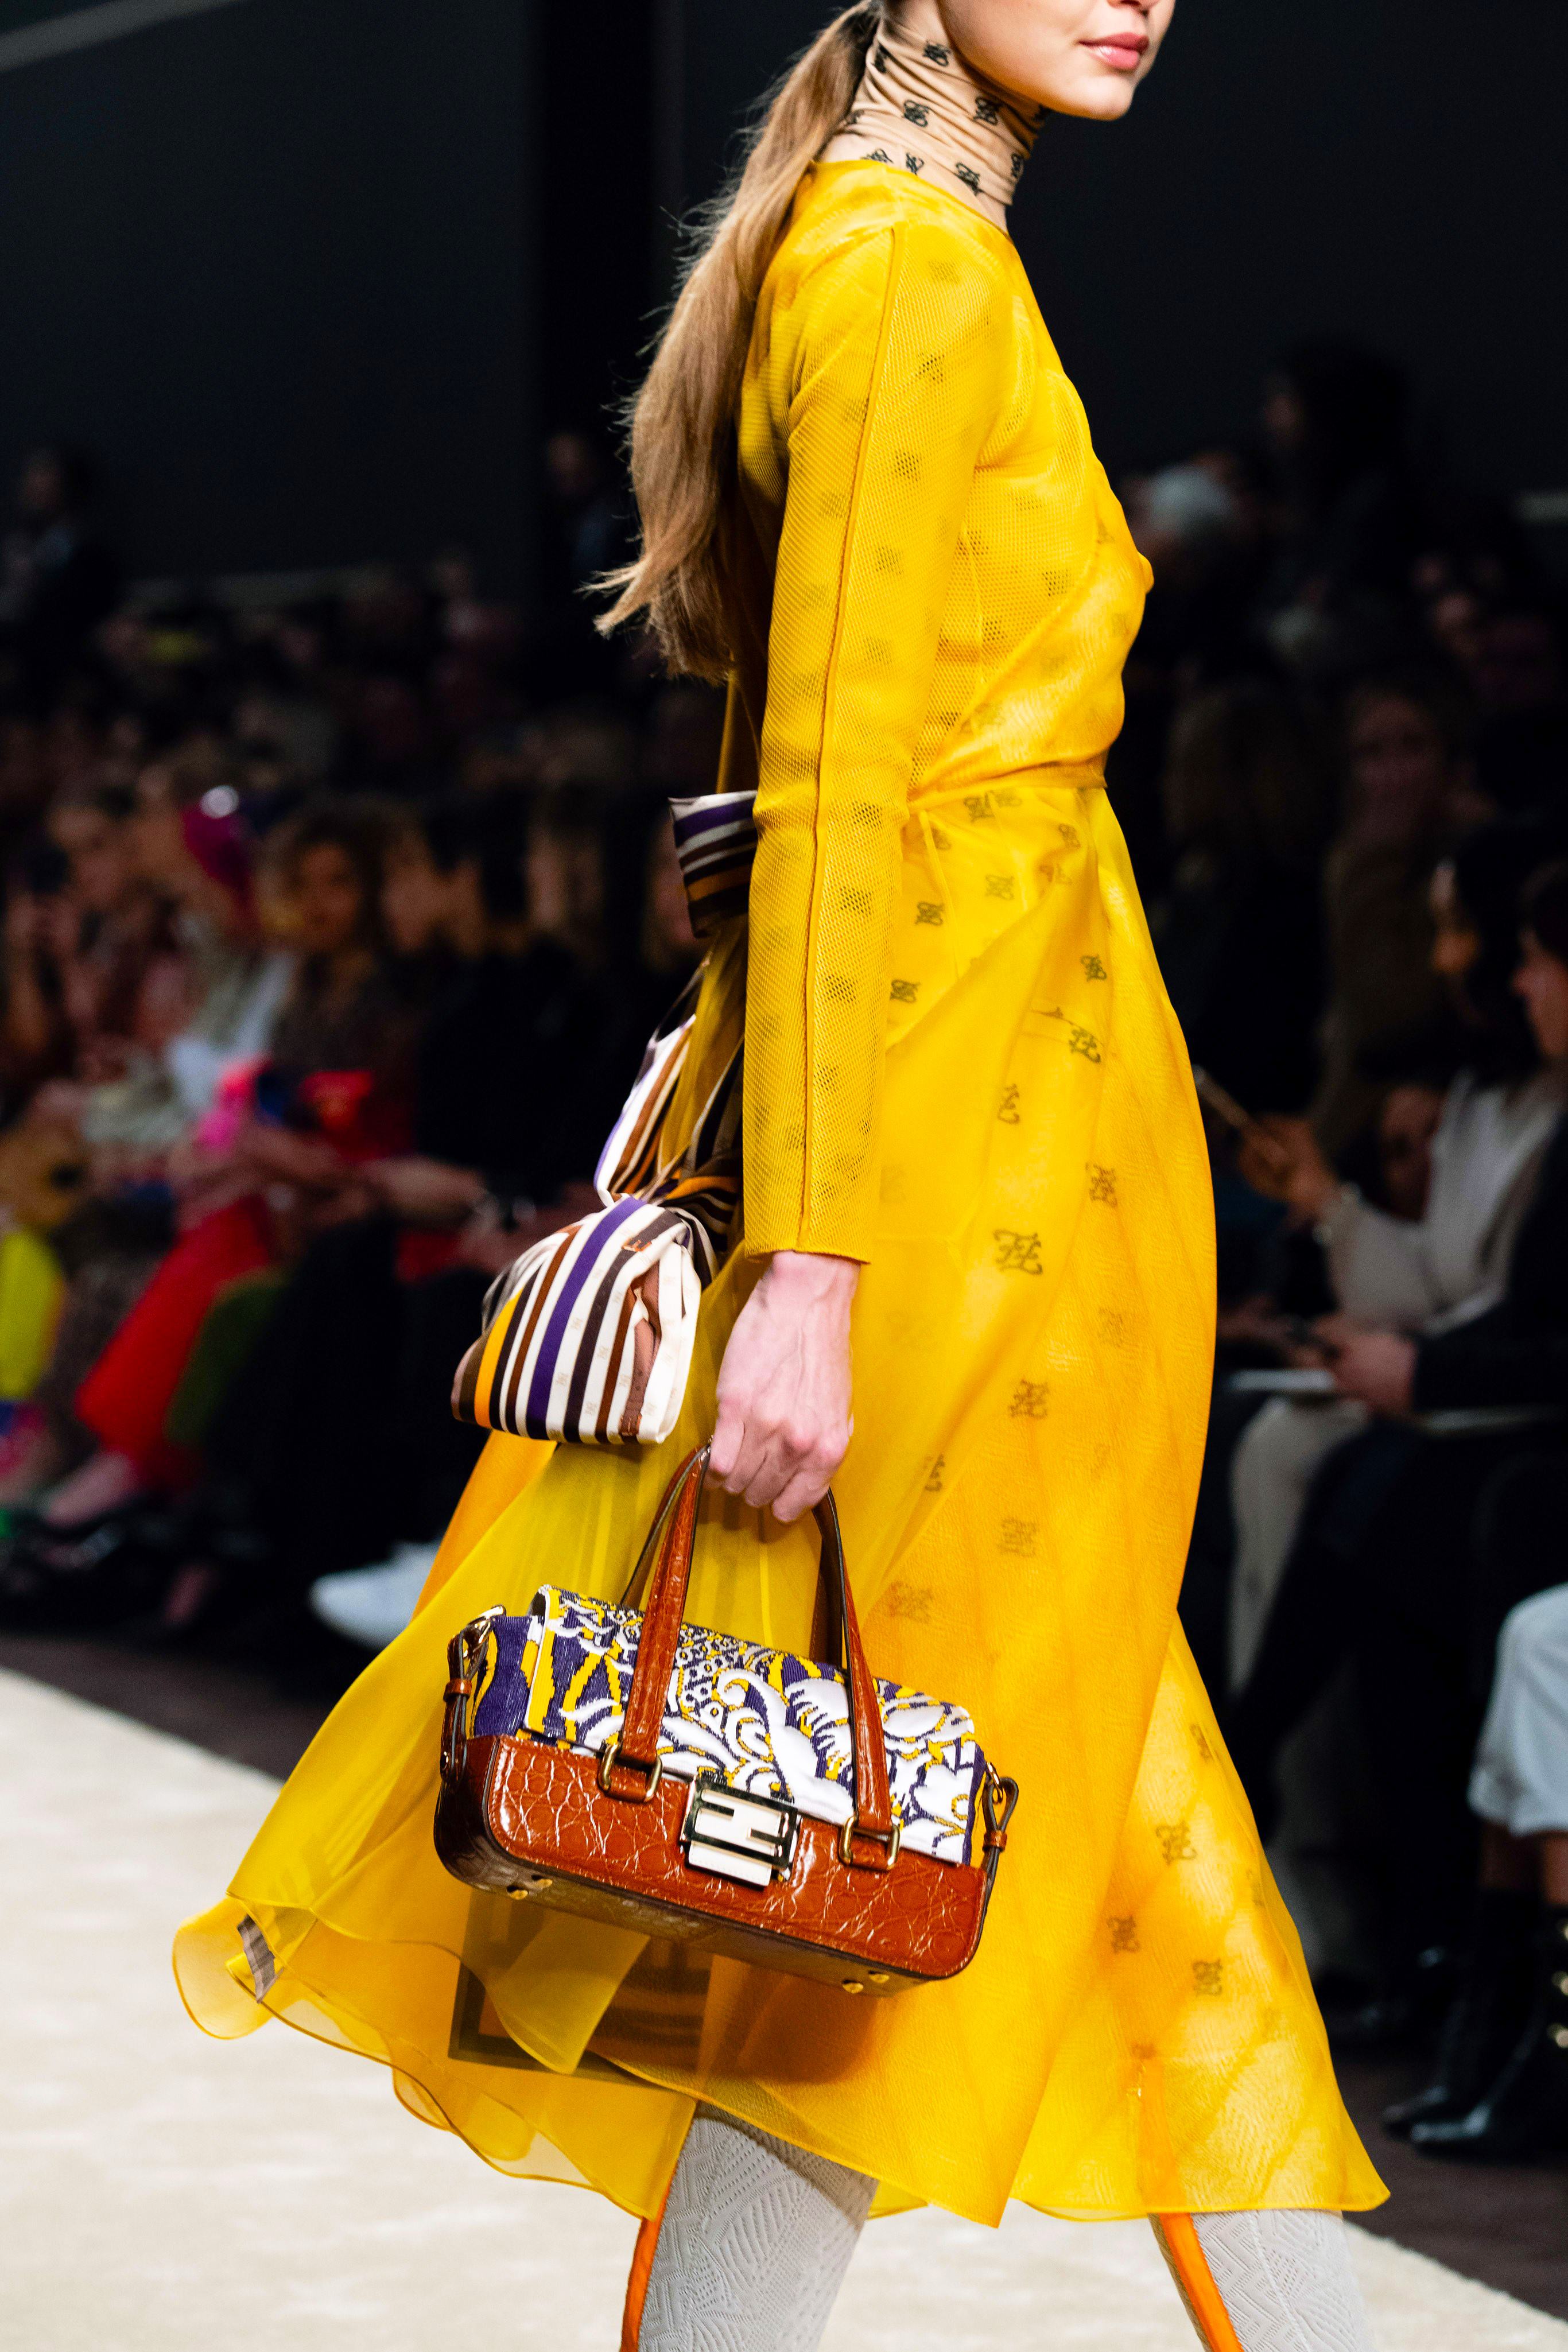 Printed Fendi Baguette Bag from the Fall 2019 Runway Bag Collection